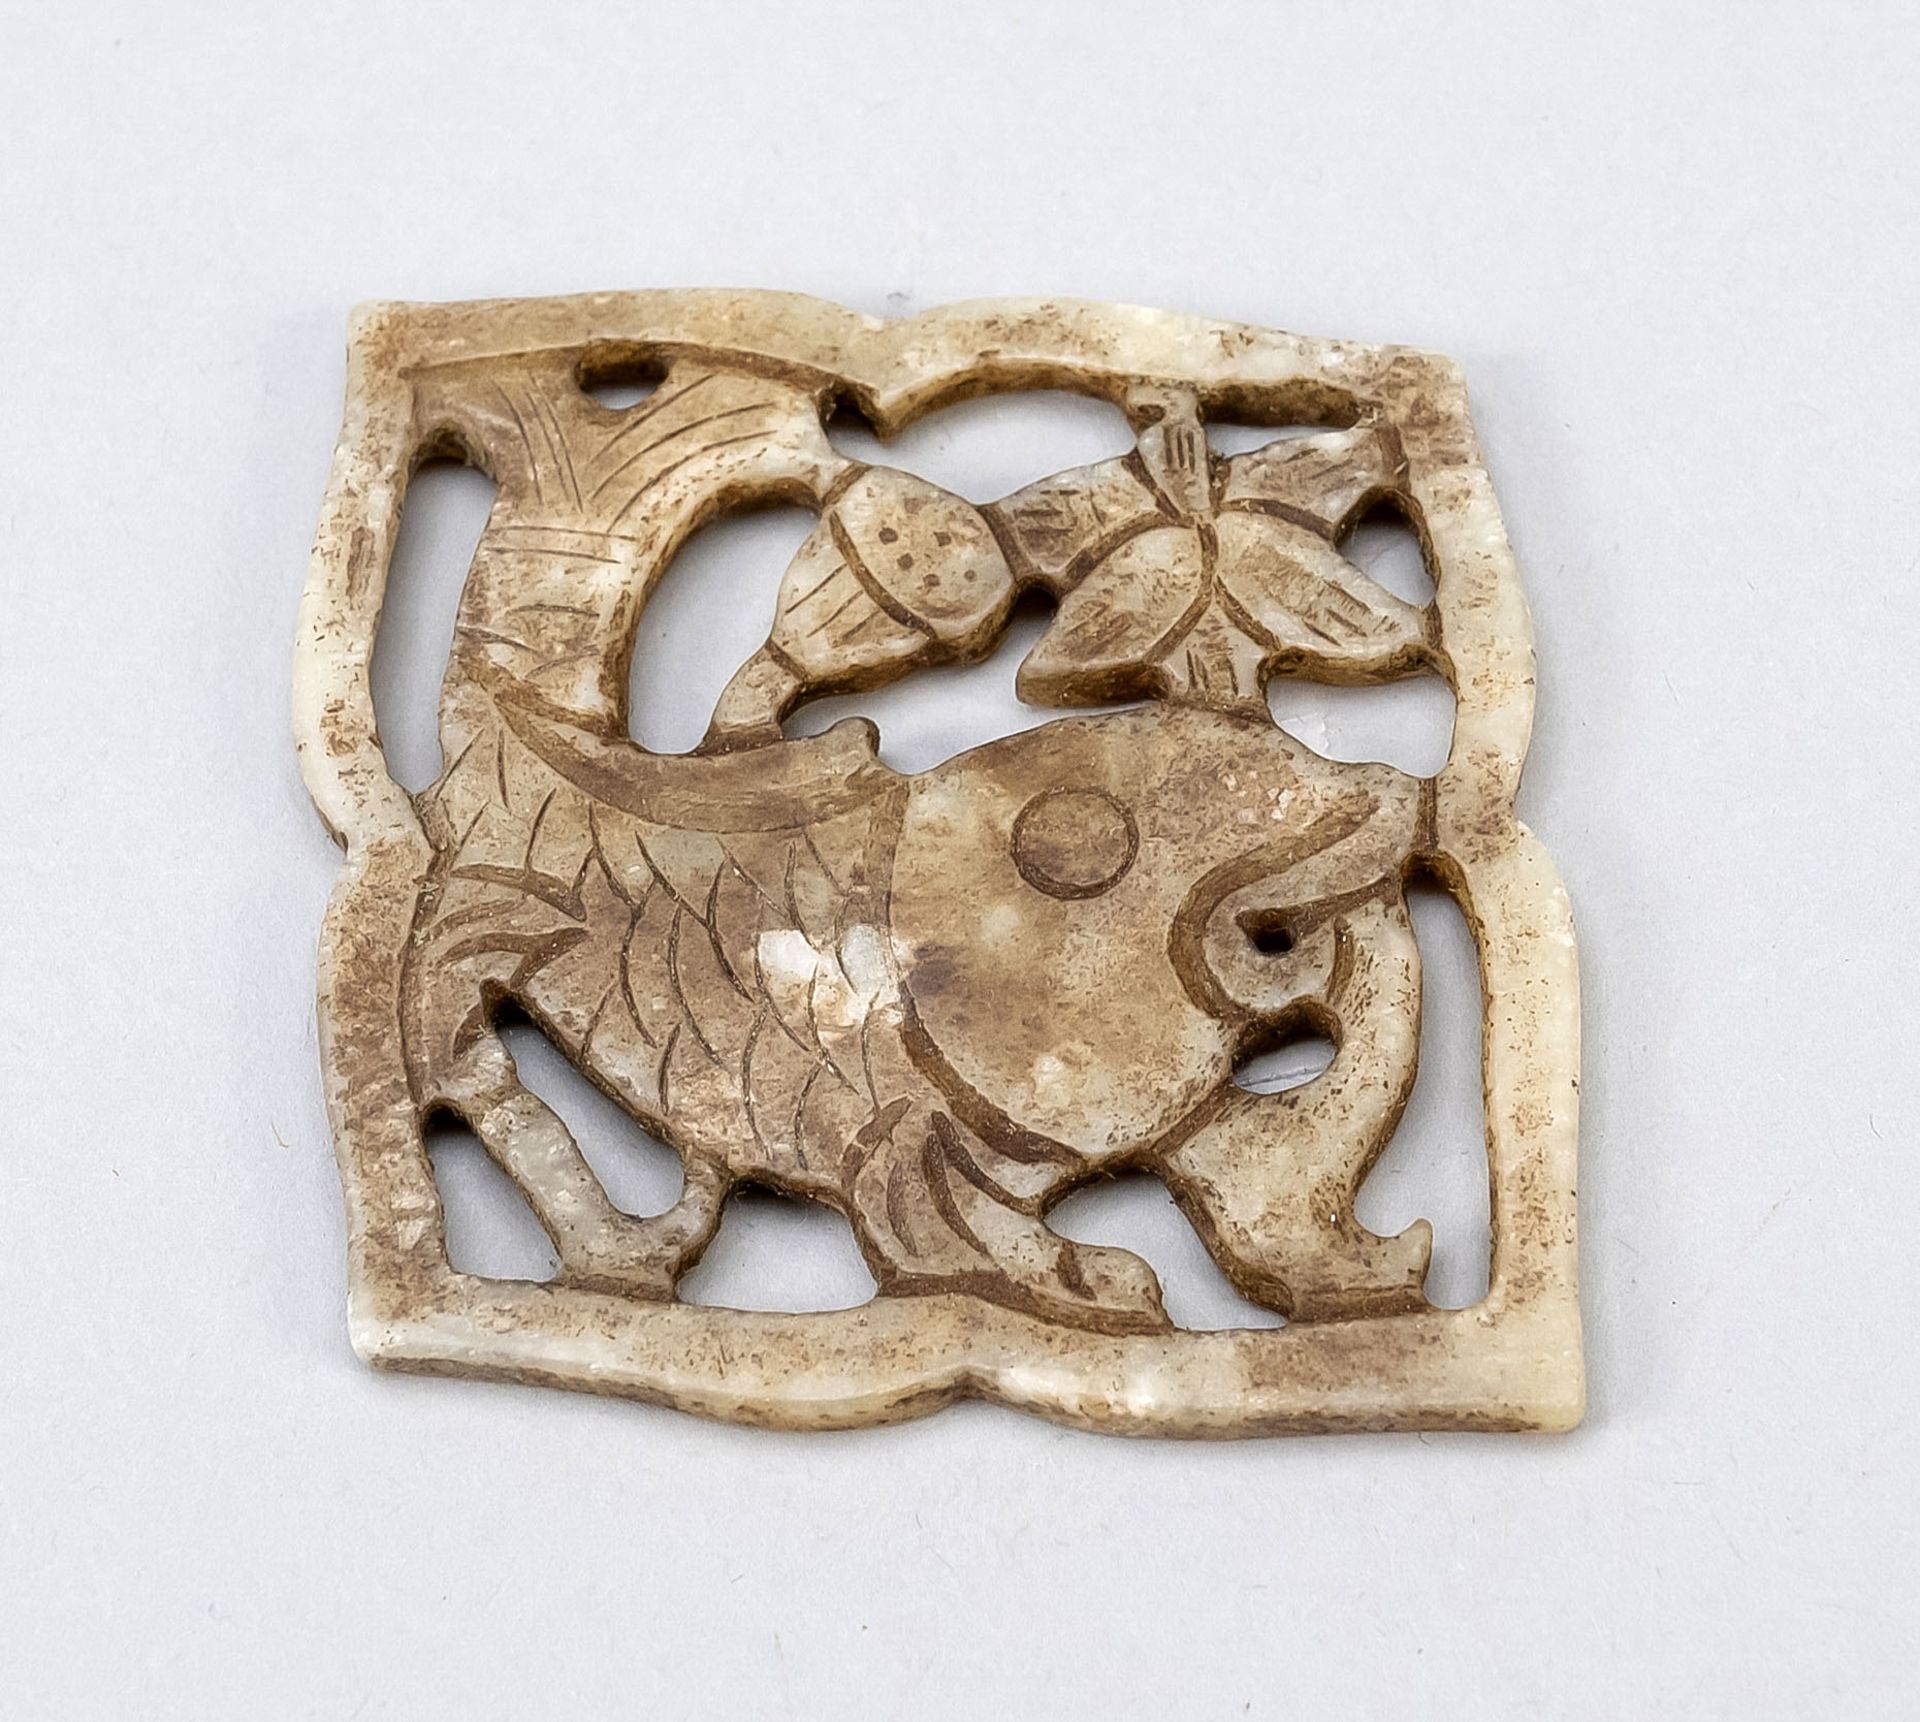 Jade amulet, China, probably Qing dynasty(1644-1912) Guangxu period(1875-1908), lozenge in flower